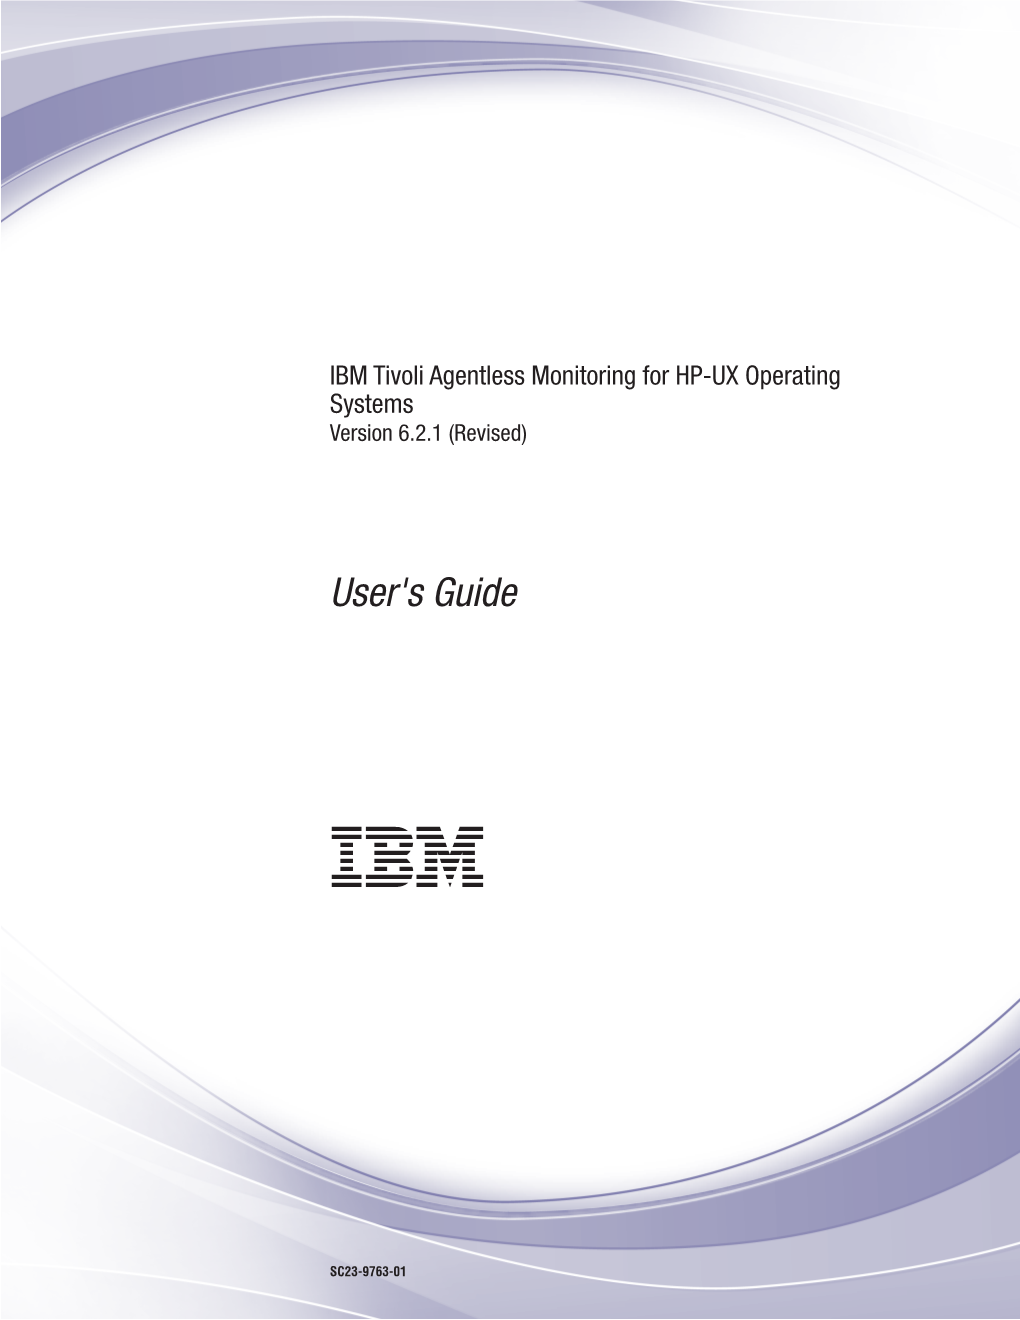 IBM Tivoli Agentless Monitoring for HP-UX Operating Systems User's Guide Tables